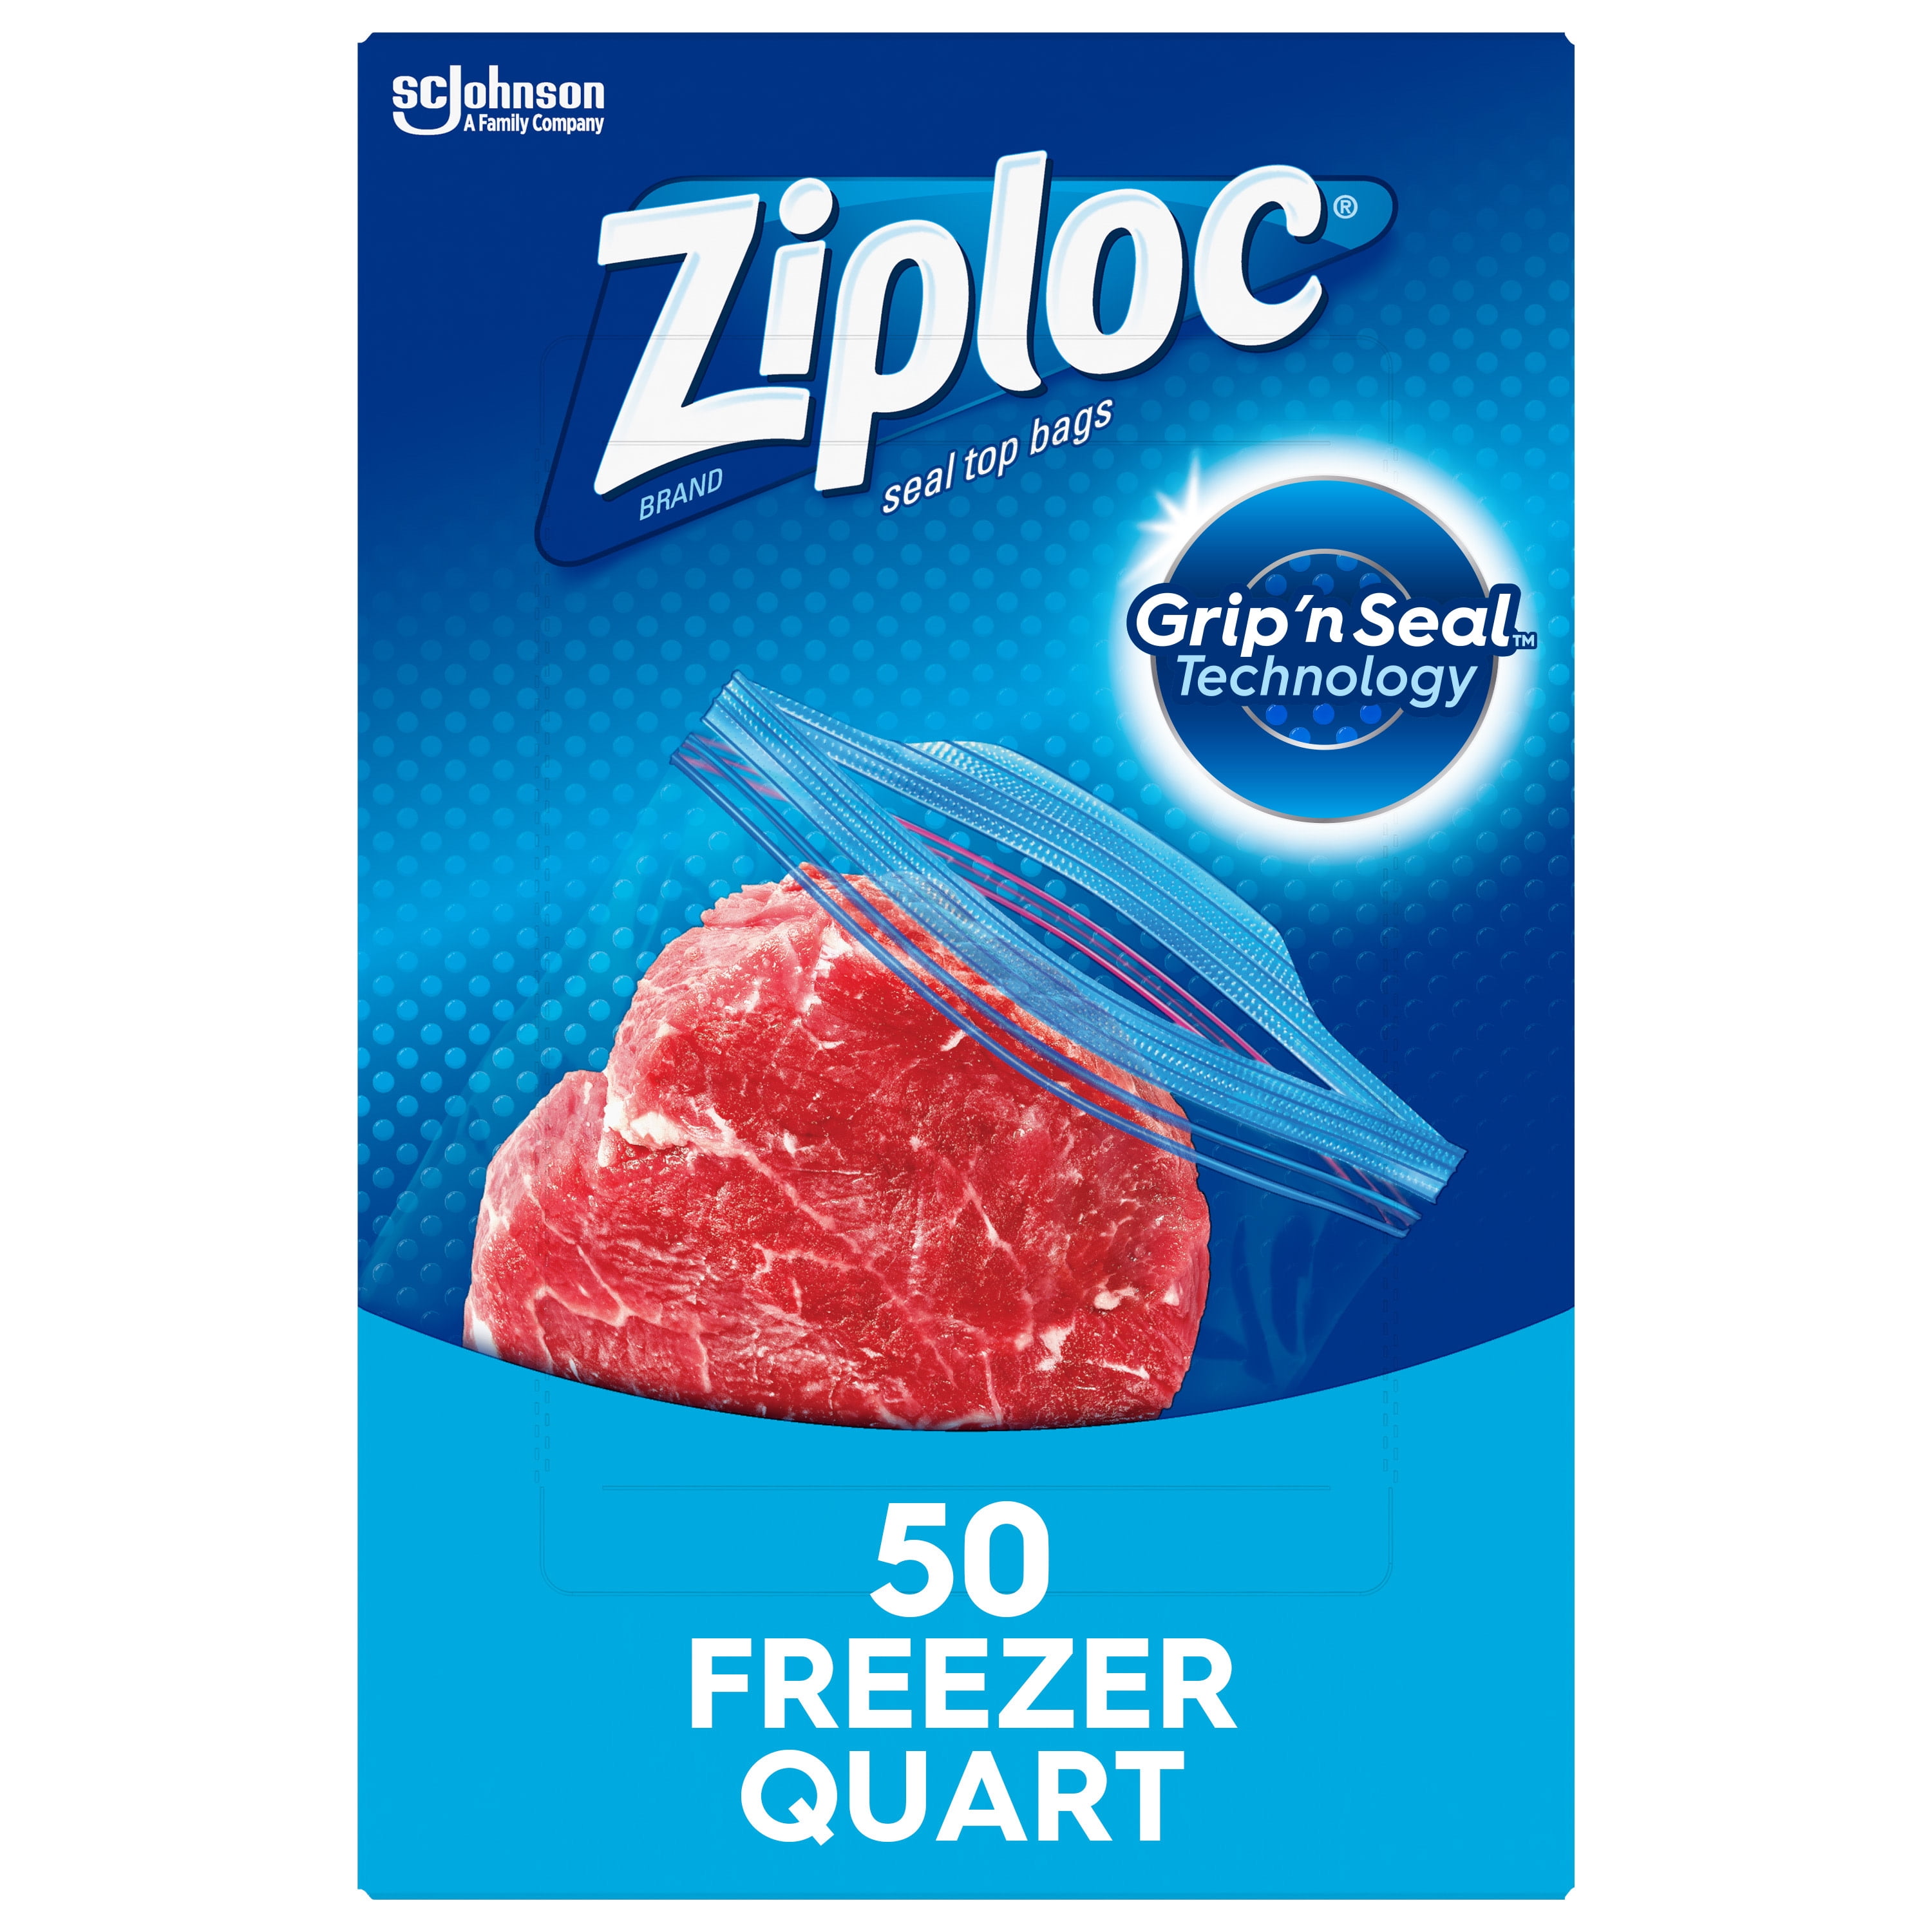 Ziploc® Brand Freezer Bags with Grip 'n Seal Technology, Quart, 50 Count